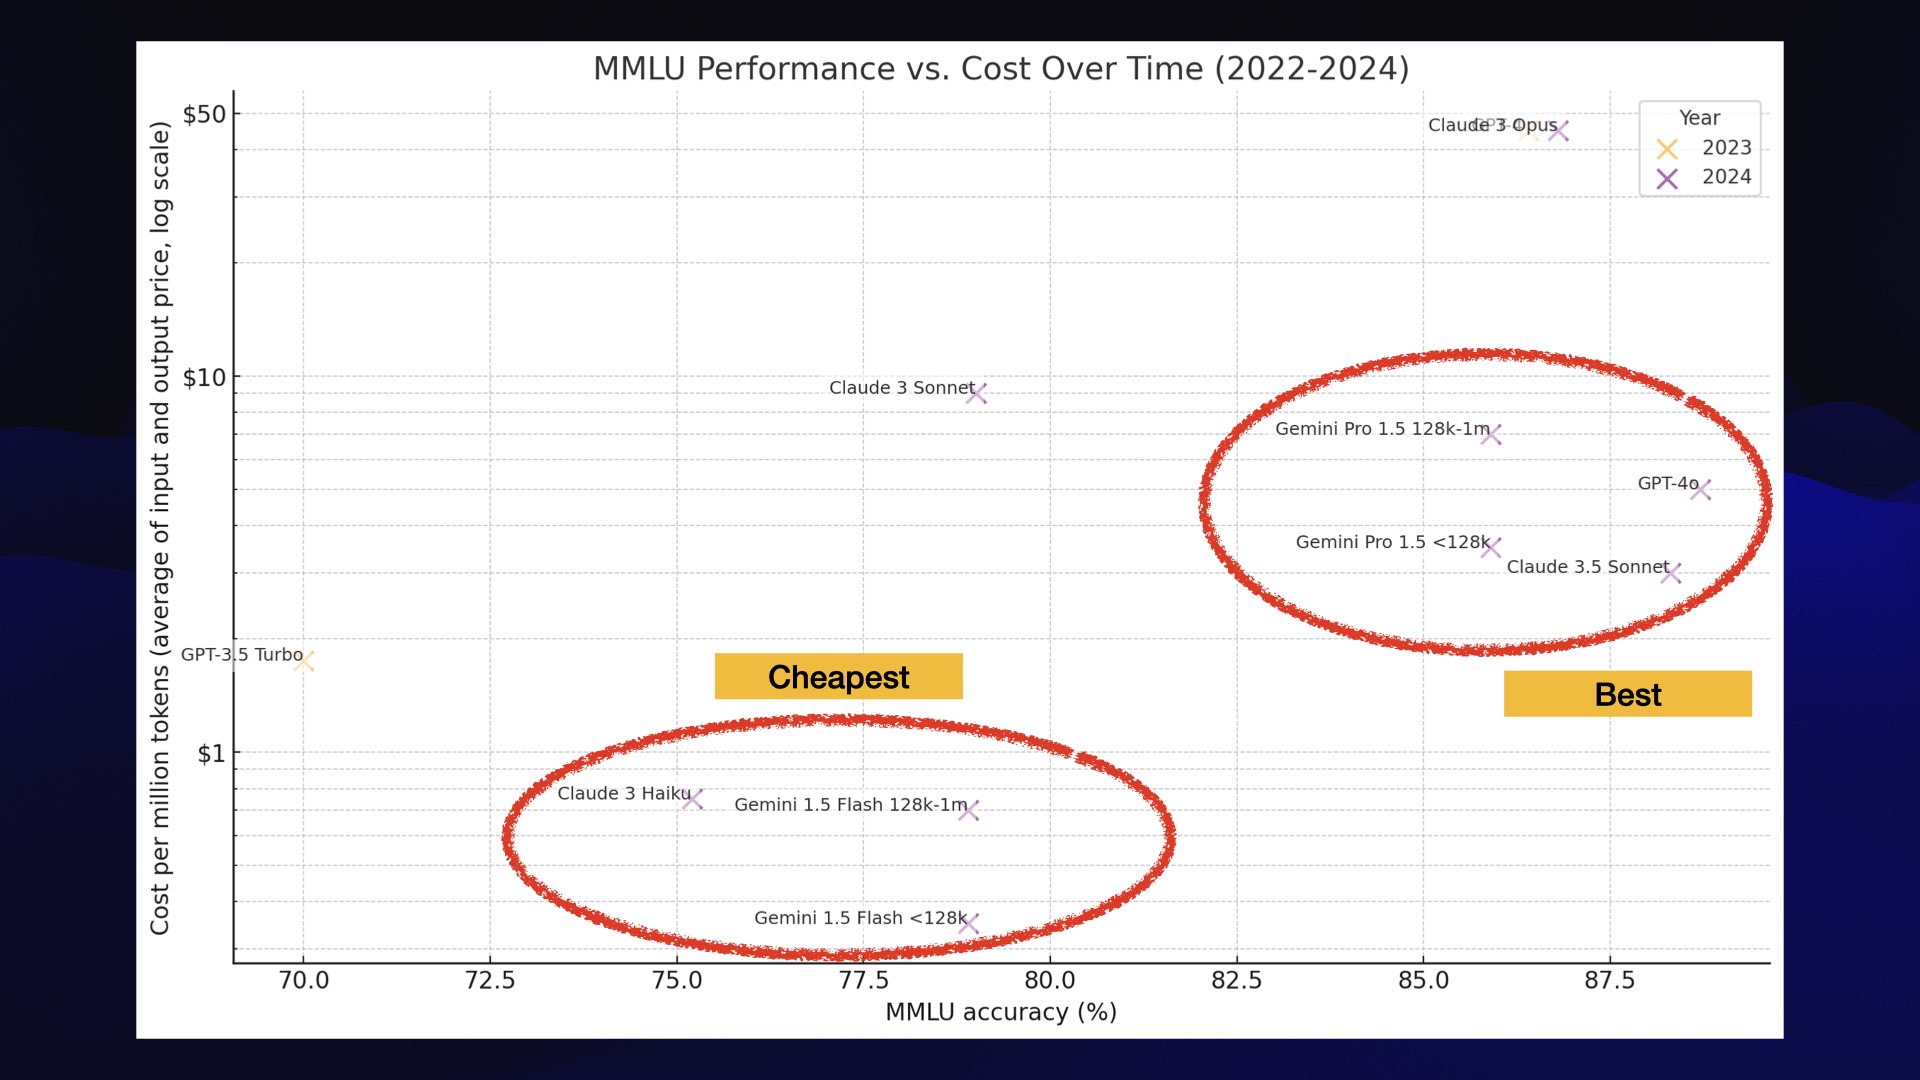 A circle labelled "cheapest" grouping Claude 3 Haiku and the Gemini 1.5 Flash models. They are a lot cheaper than the "best" models but also score less highly on MMLU.